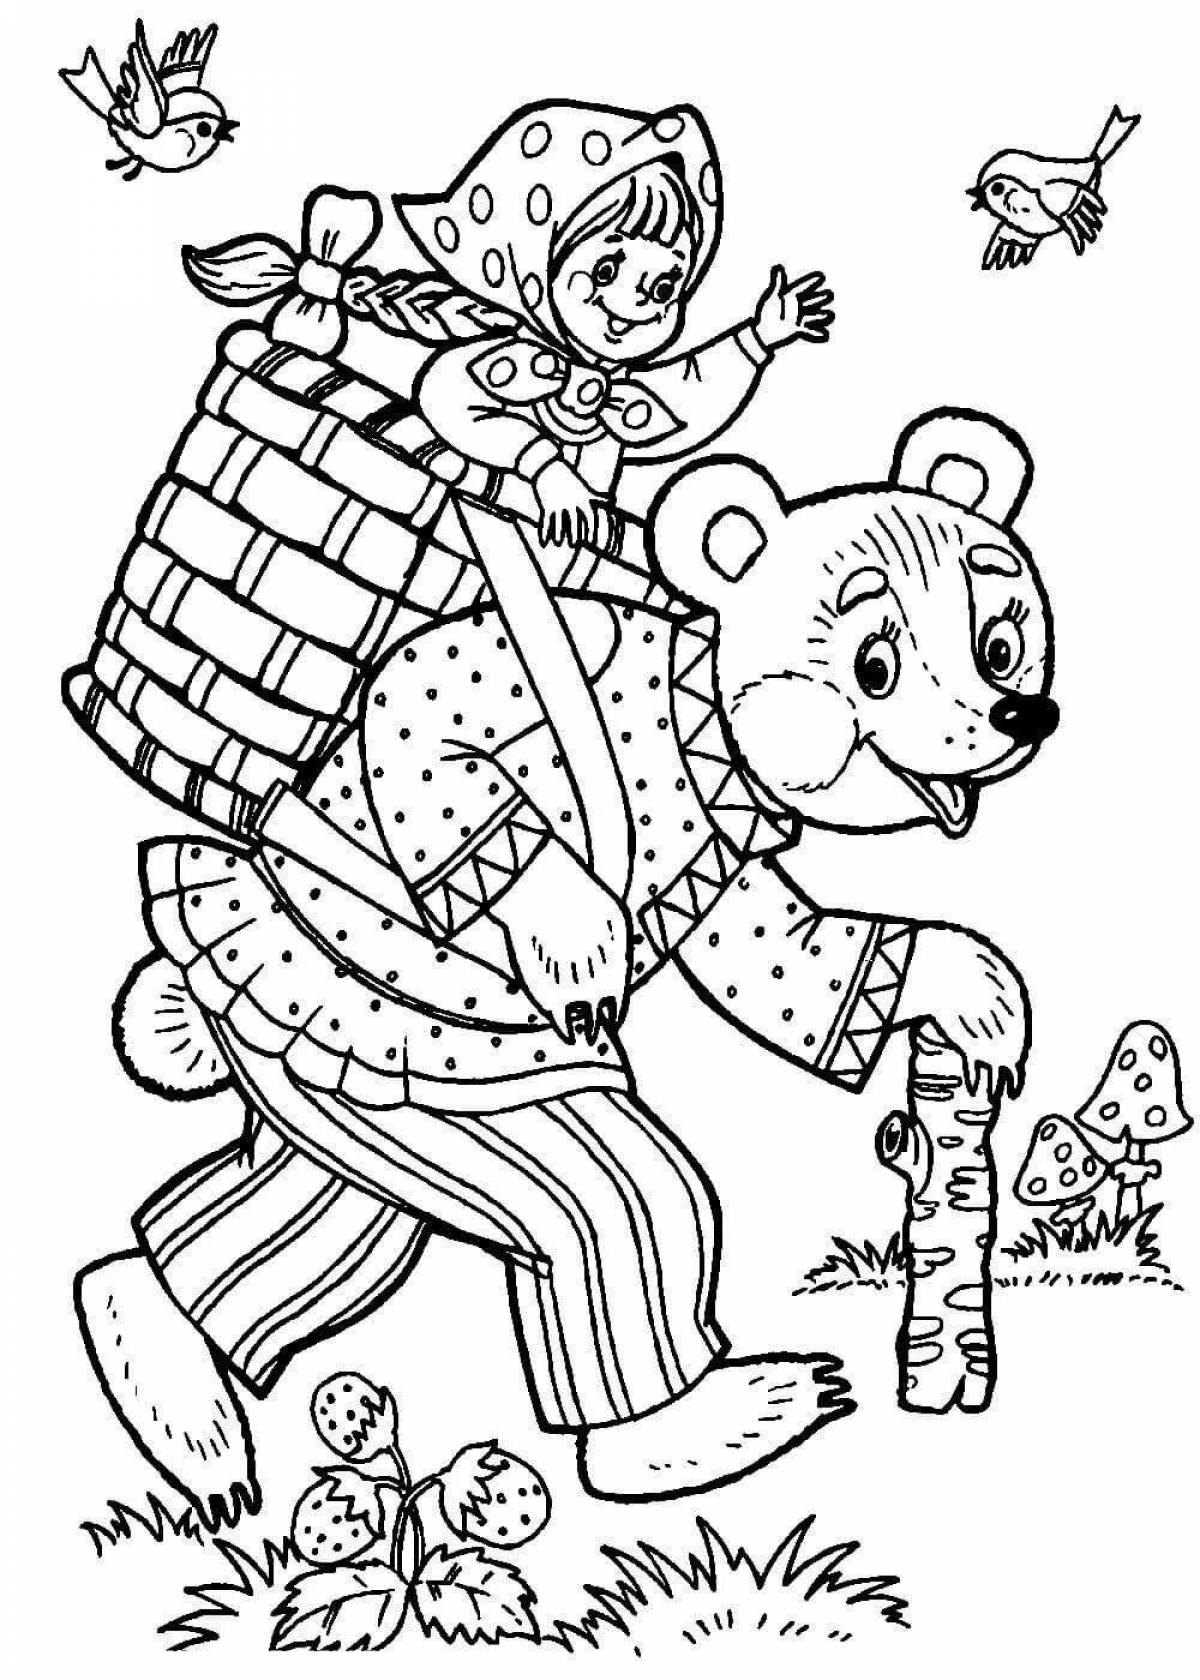 Violent coloring book based on Russian folk tales